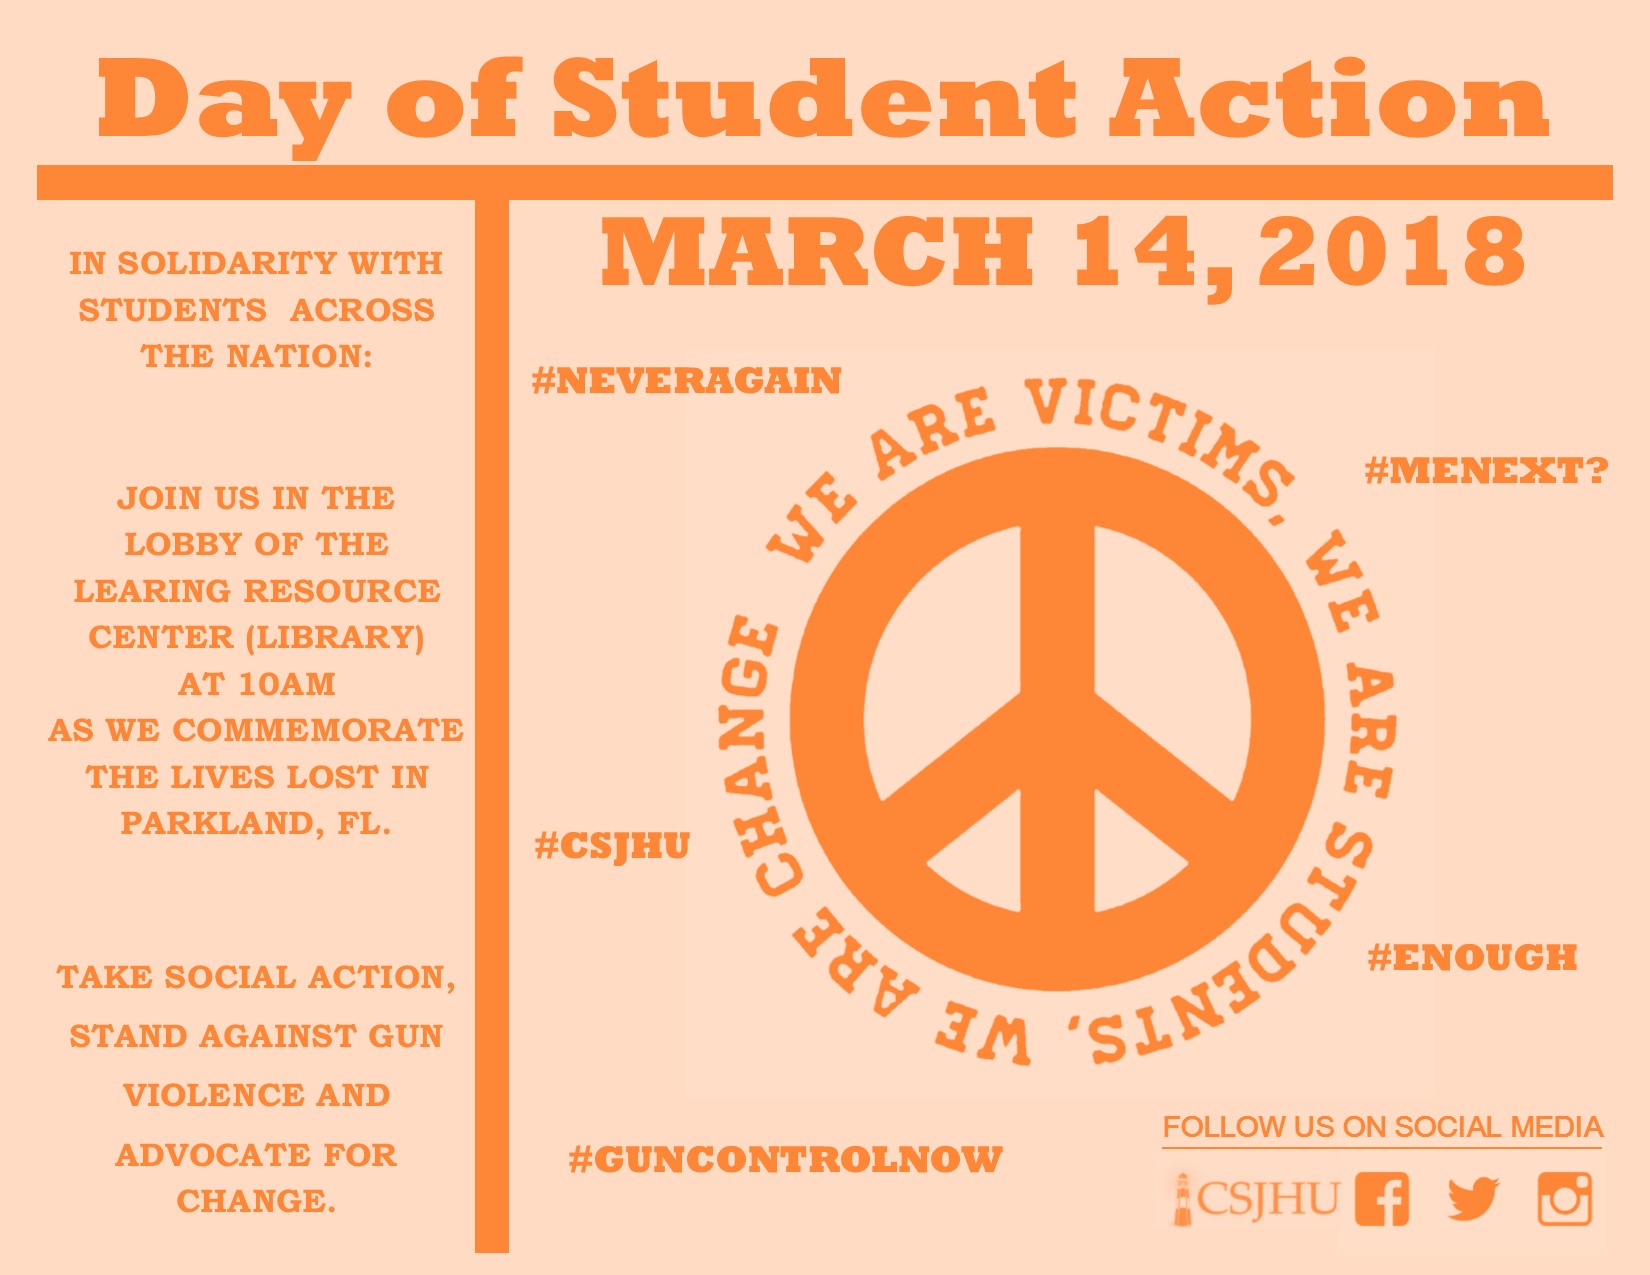 Day of Student Action - March 14, 2018 - Event Flyer